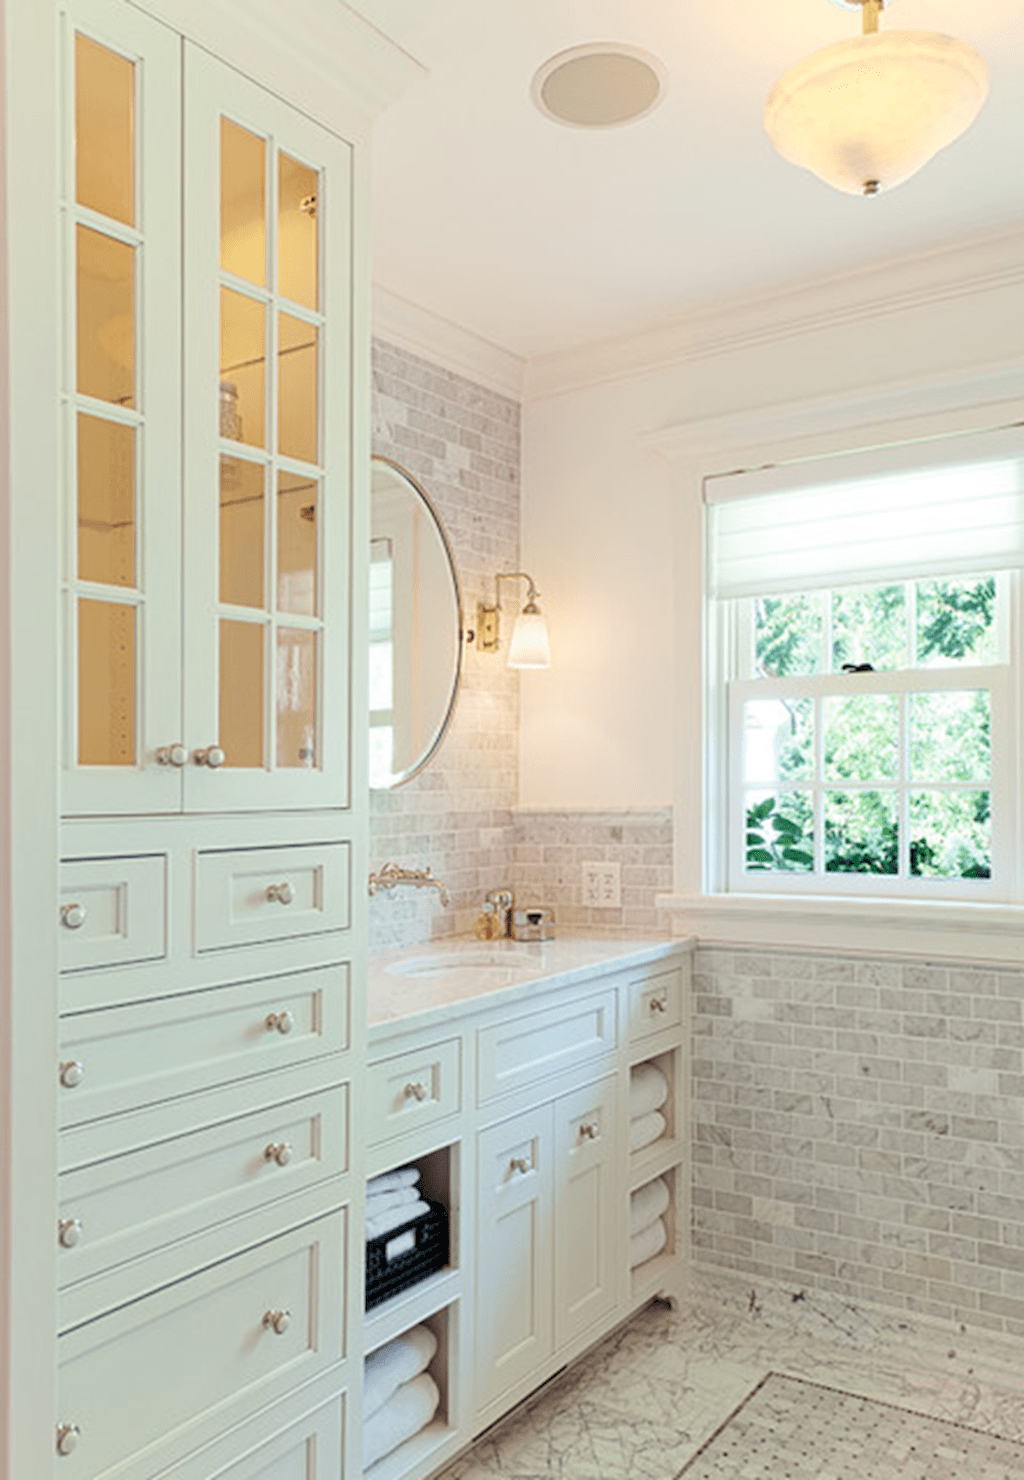 Functional bathroom storage and space saving ideas 24.png